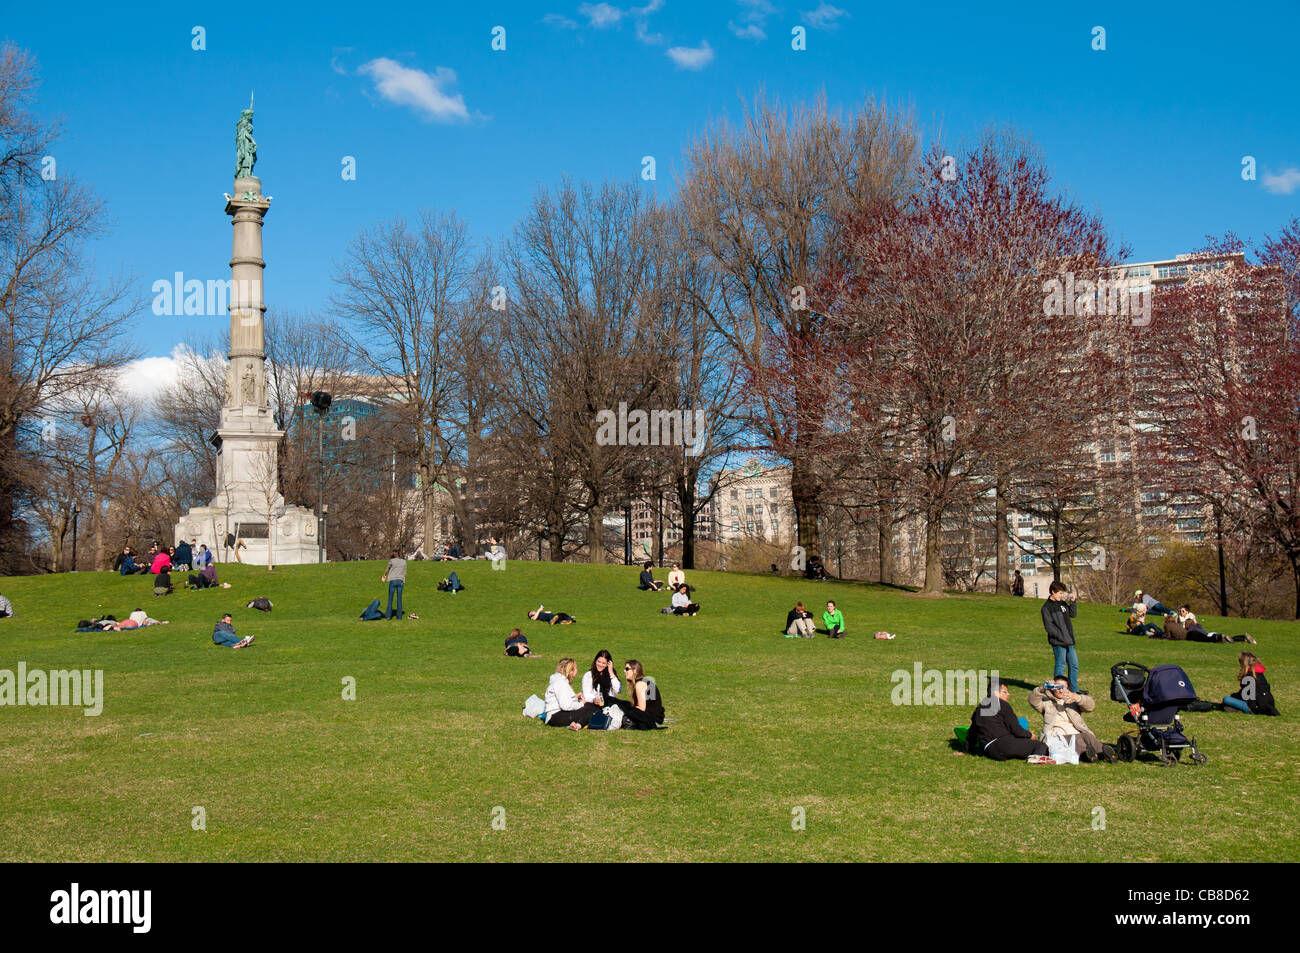 The Soldiers and Sailors Monument and people picnicking on the lawn in Boston Common park in spring Stock Photo